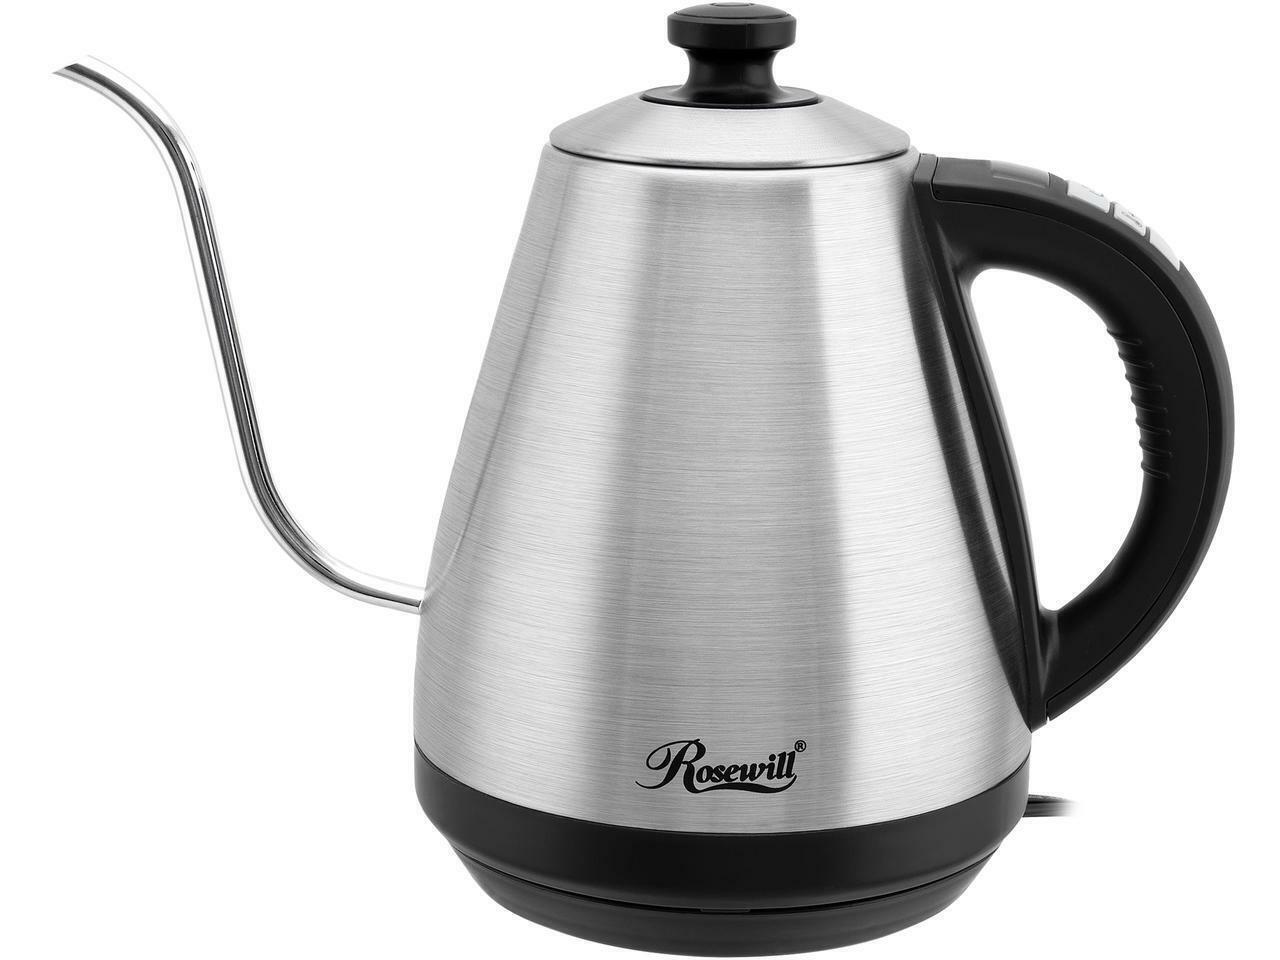 Rosewill RHKT-17002 1-Liter Electric Gooseneck Kettle Water Boiler with Variable